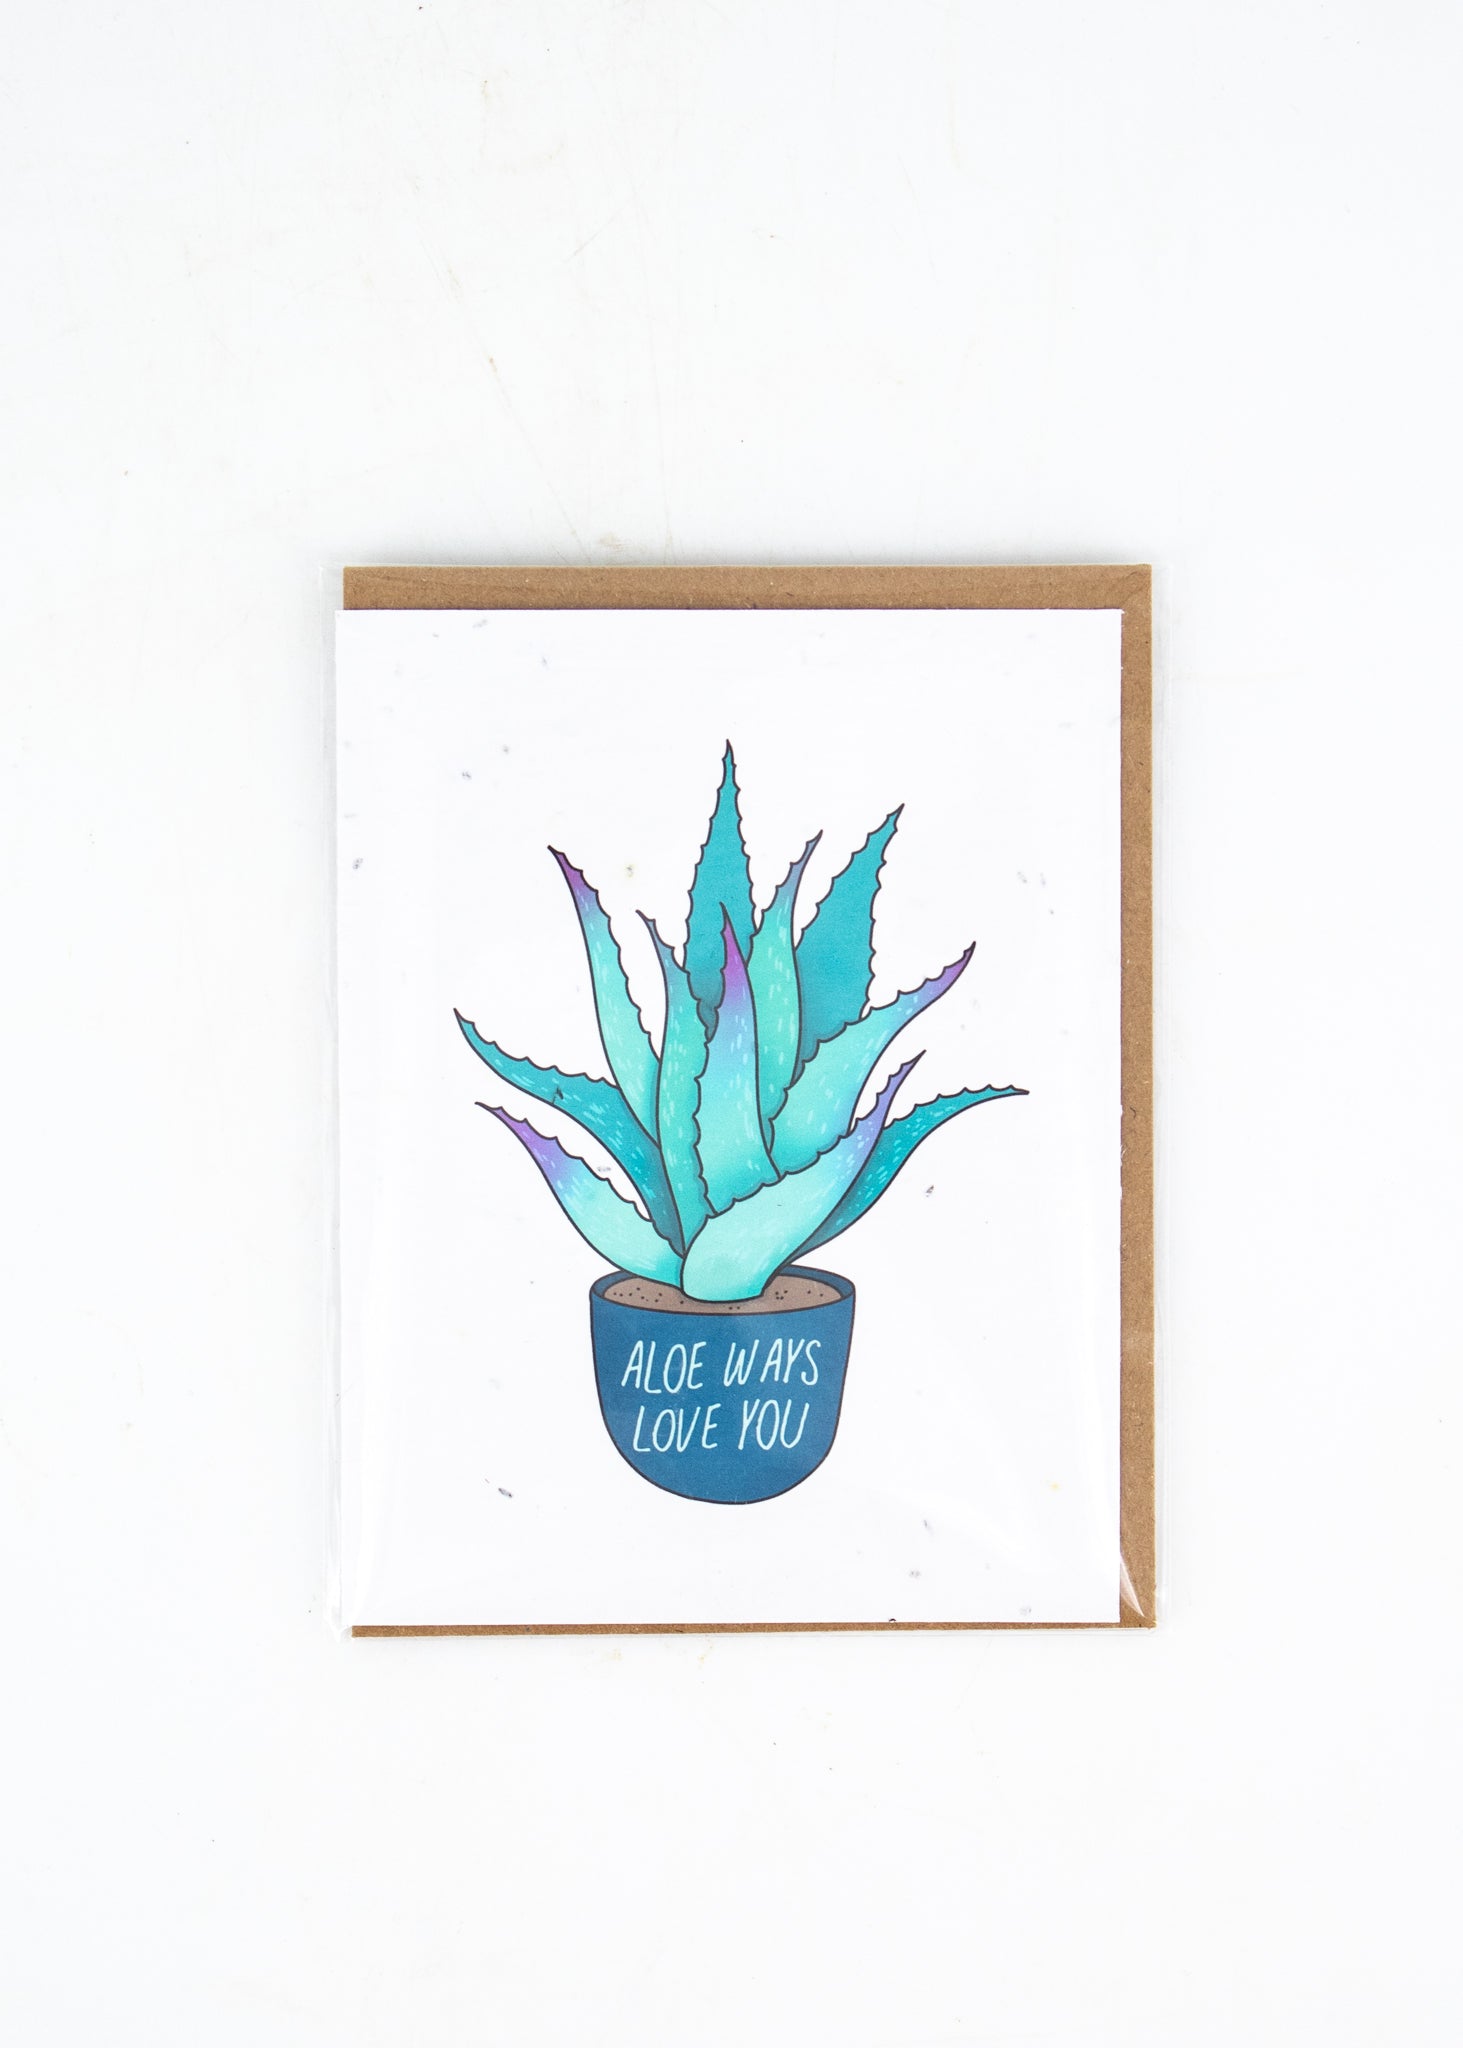 "Aloe Ways Love You" Plantable Seed Paper Card -  - Top Hat and Monocle - Wild Lark